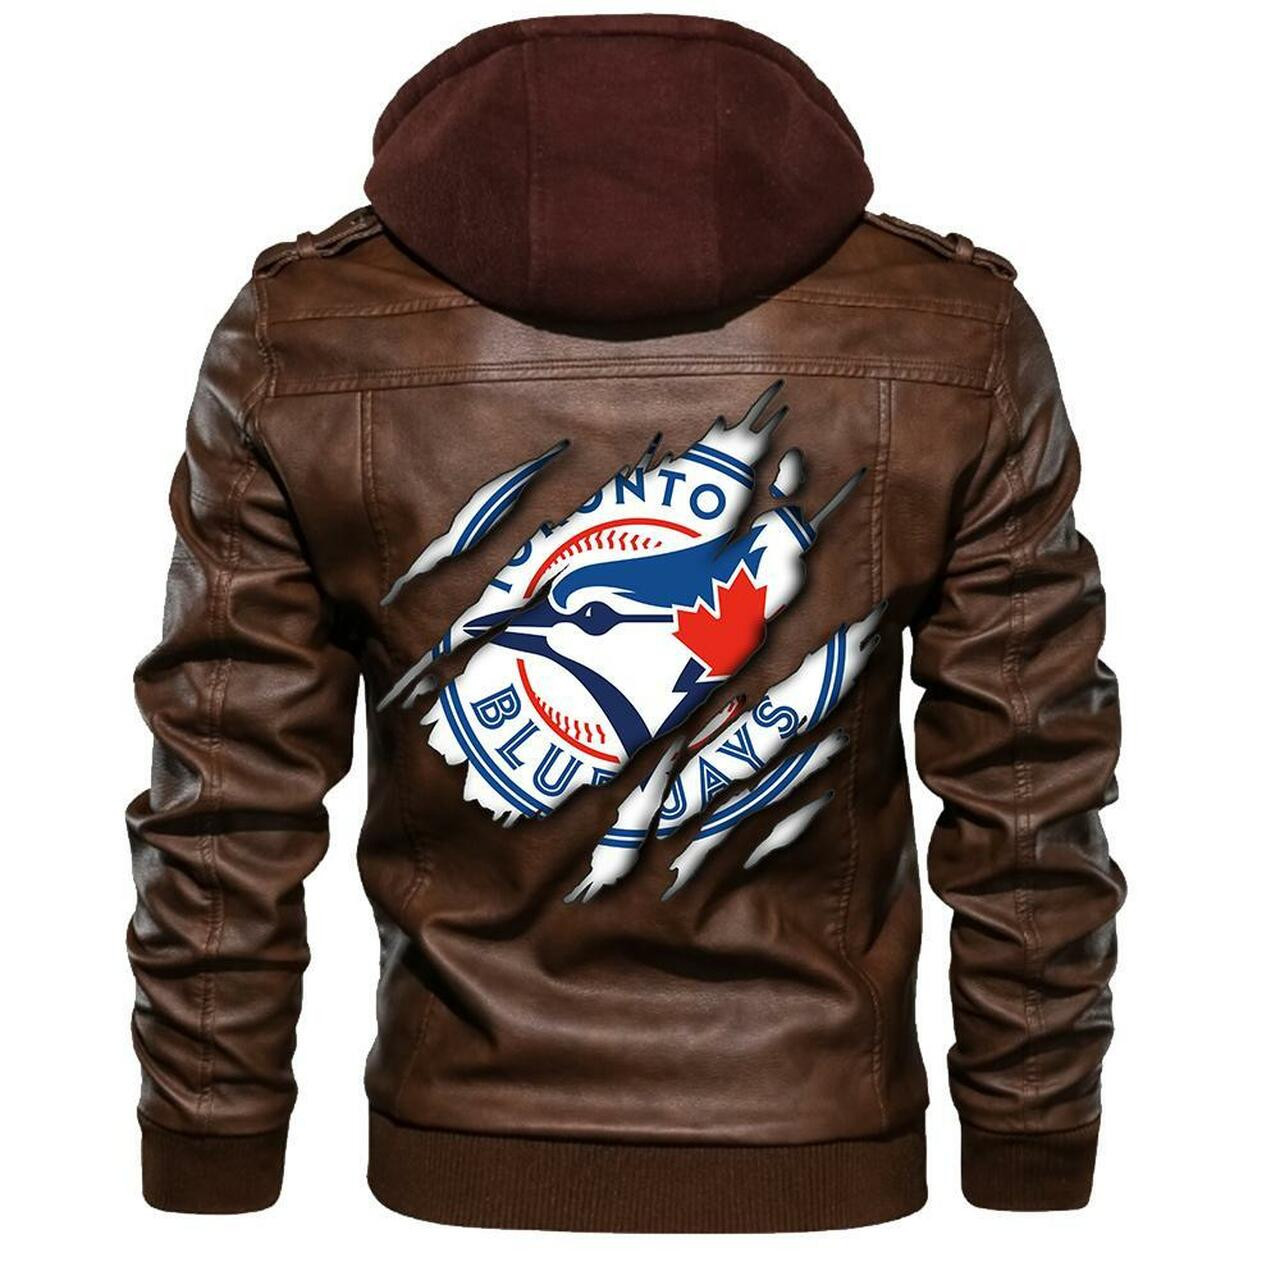 You can find Leather Jacket online at a great price 90